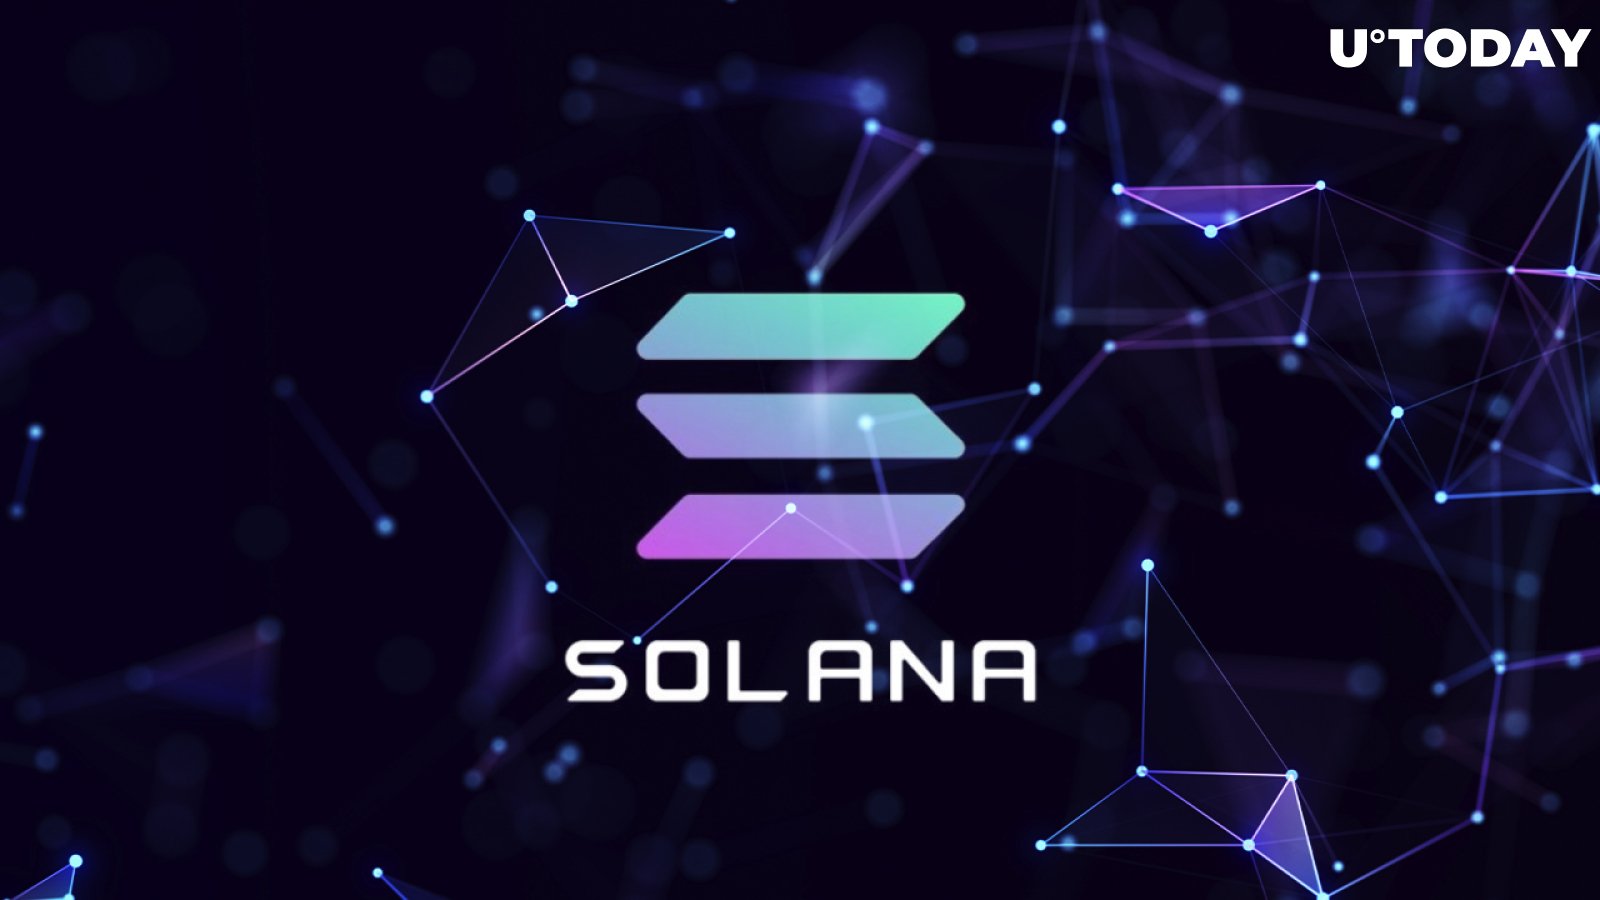 Solana's Impressive Market Performance Was Followed by Cover-Up of Additional 12 Million Coins in Secret Wallet